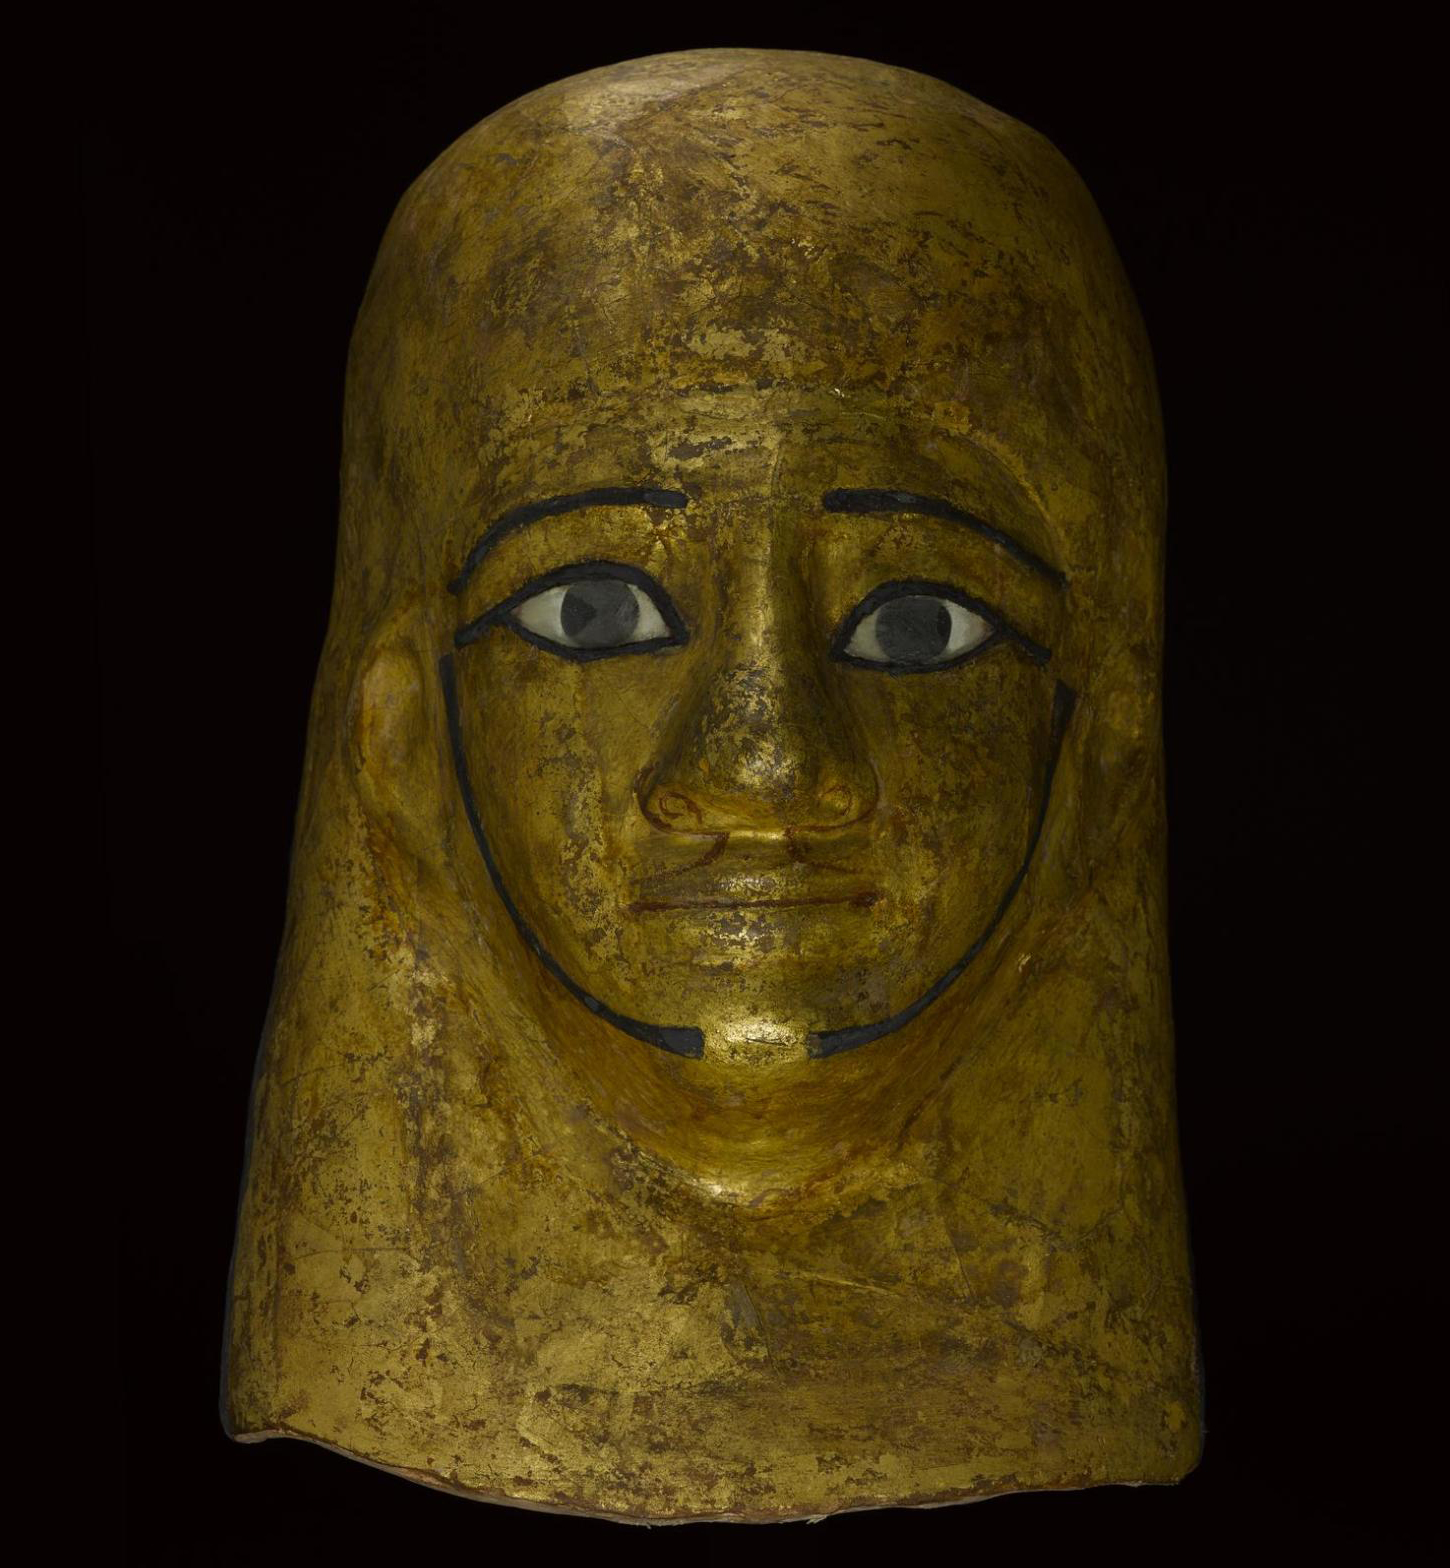 Mummy-mask of gilded and painted linen and plaster cartonnage, depicting Montsuef wearing a lappet-wig: Ancient Egyptian, c.9BC